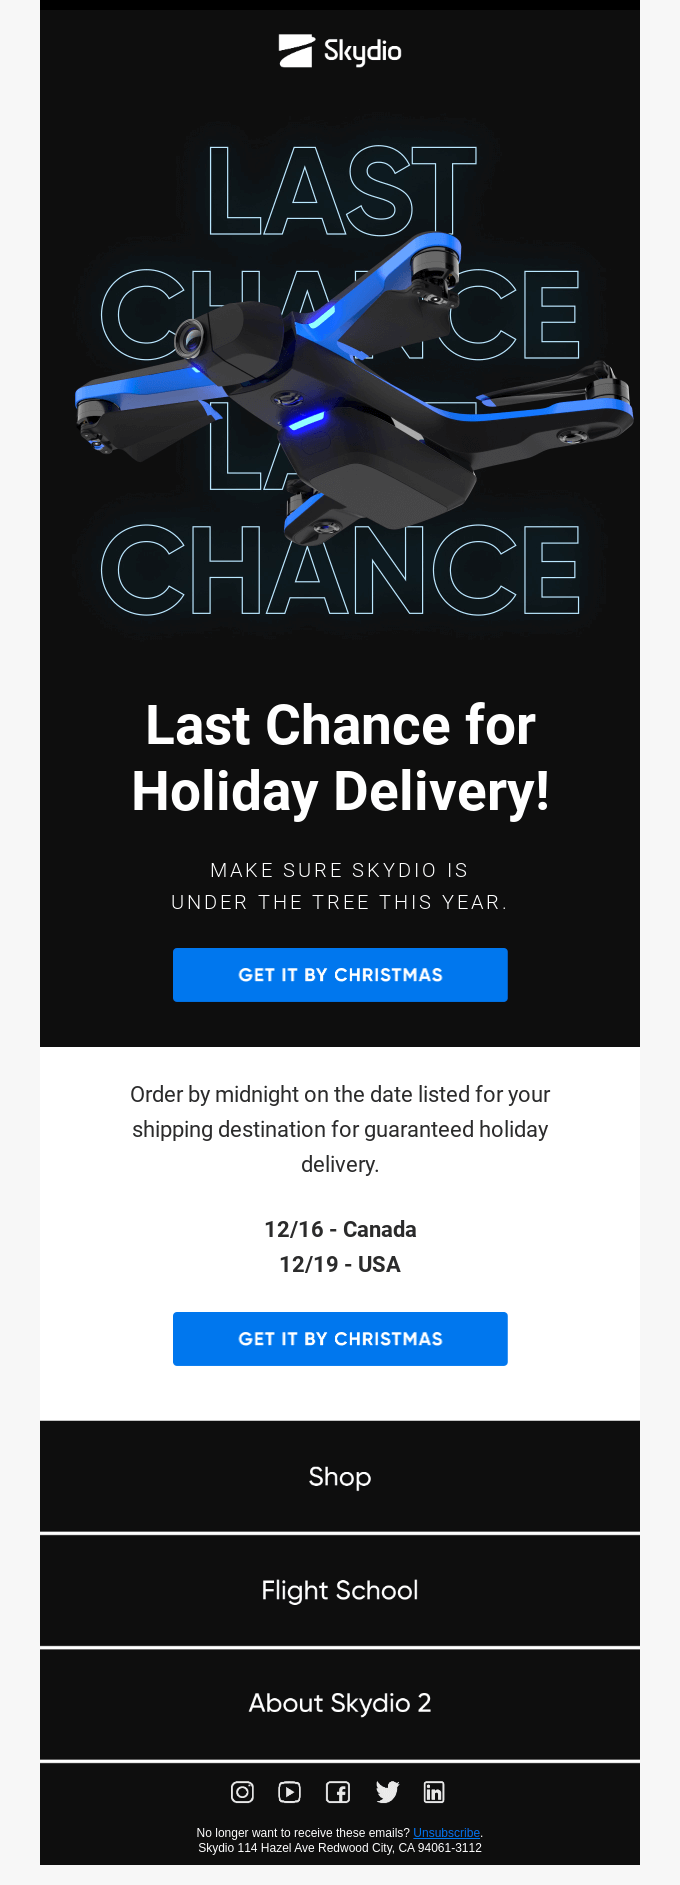 Last chance for Holiday Delivery!